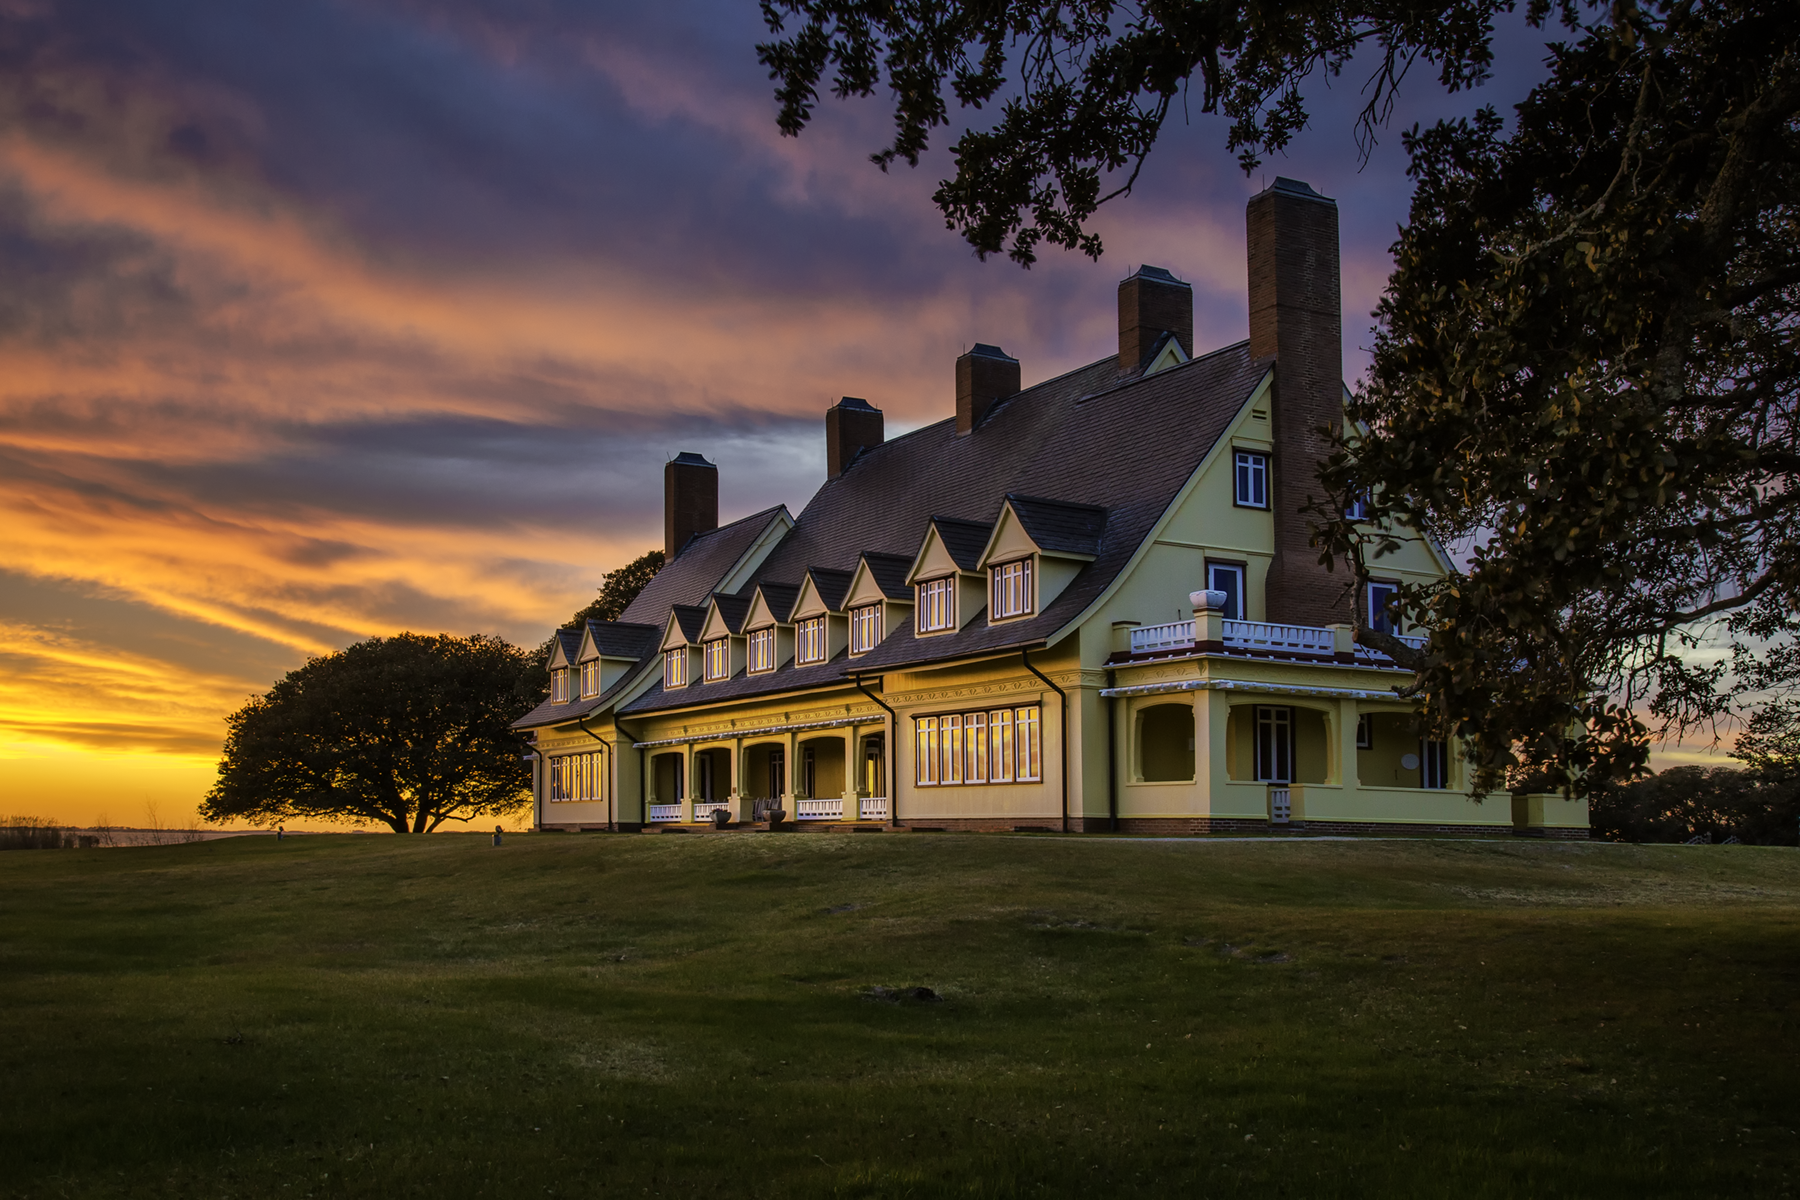 Local Tips for Your Visit to the Whalehead Club